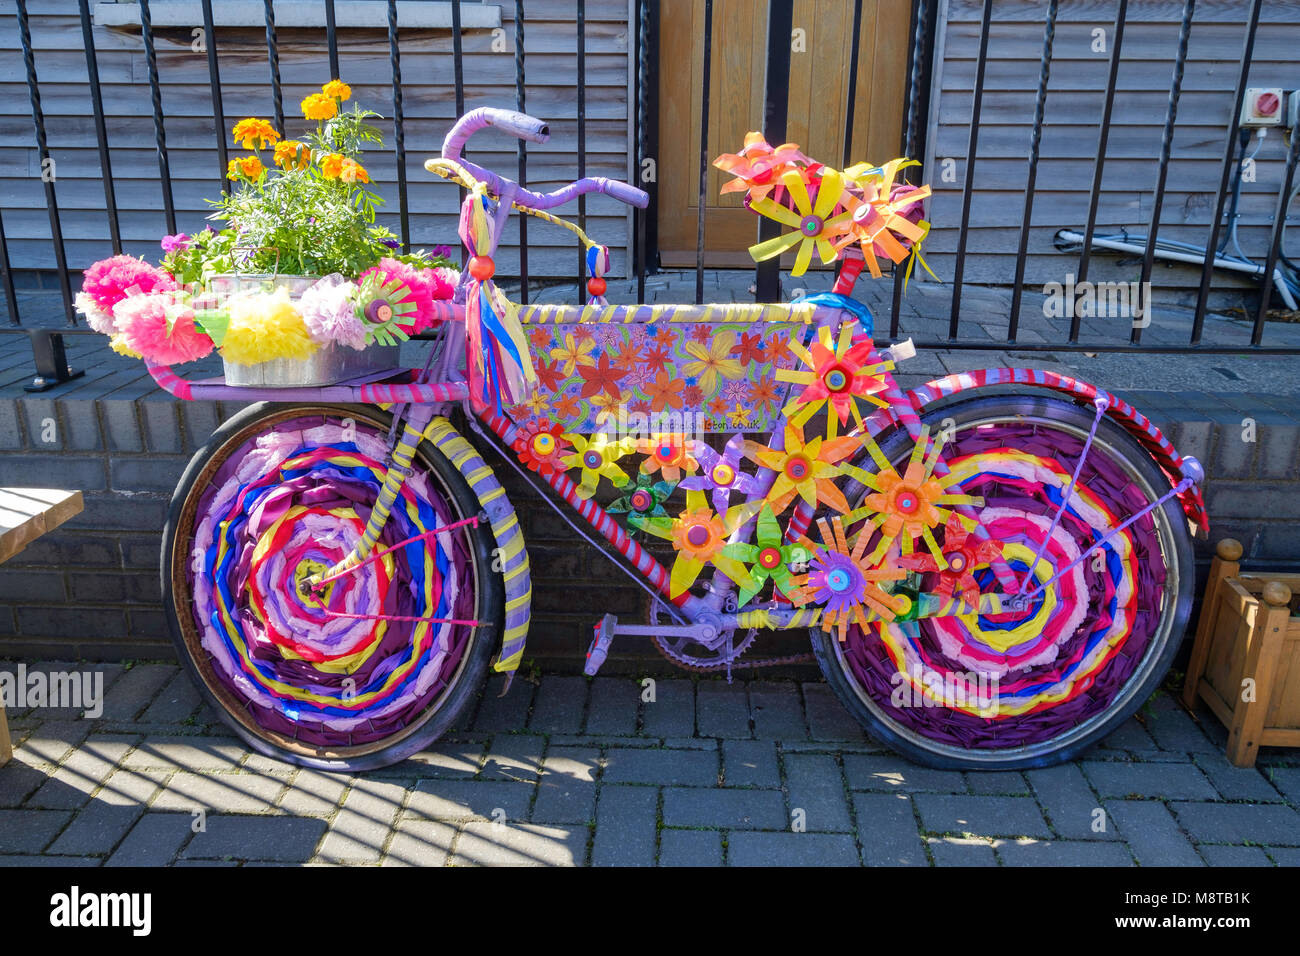 COLOURFULLY DECORATED  BIKE USED AS SALES PROP IN COURTYARD OF SMALL FARM SHOP, GLOUCESTERSHIRE UK Stock Photo